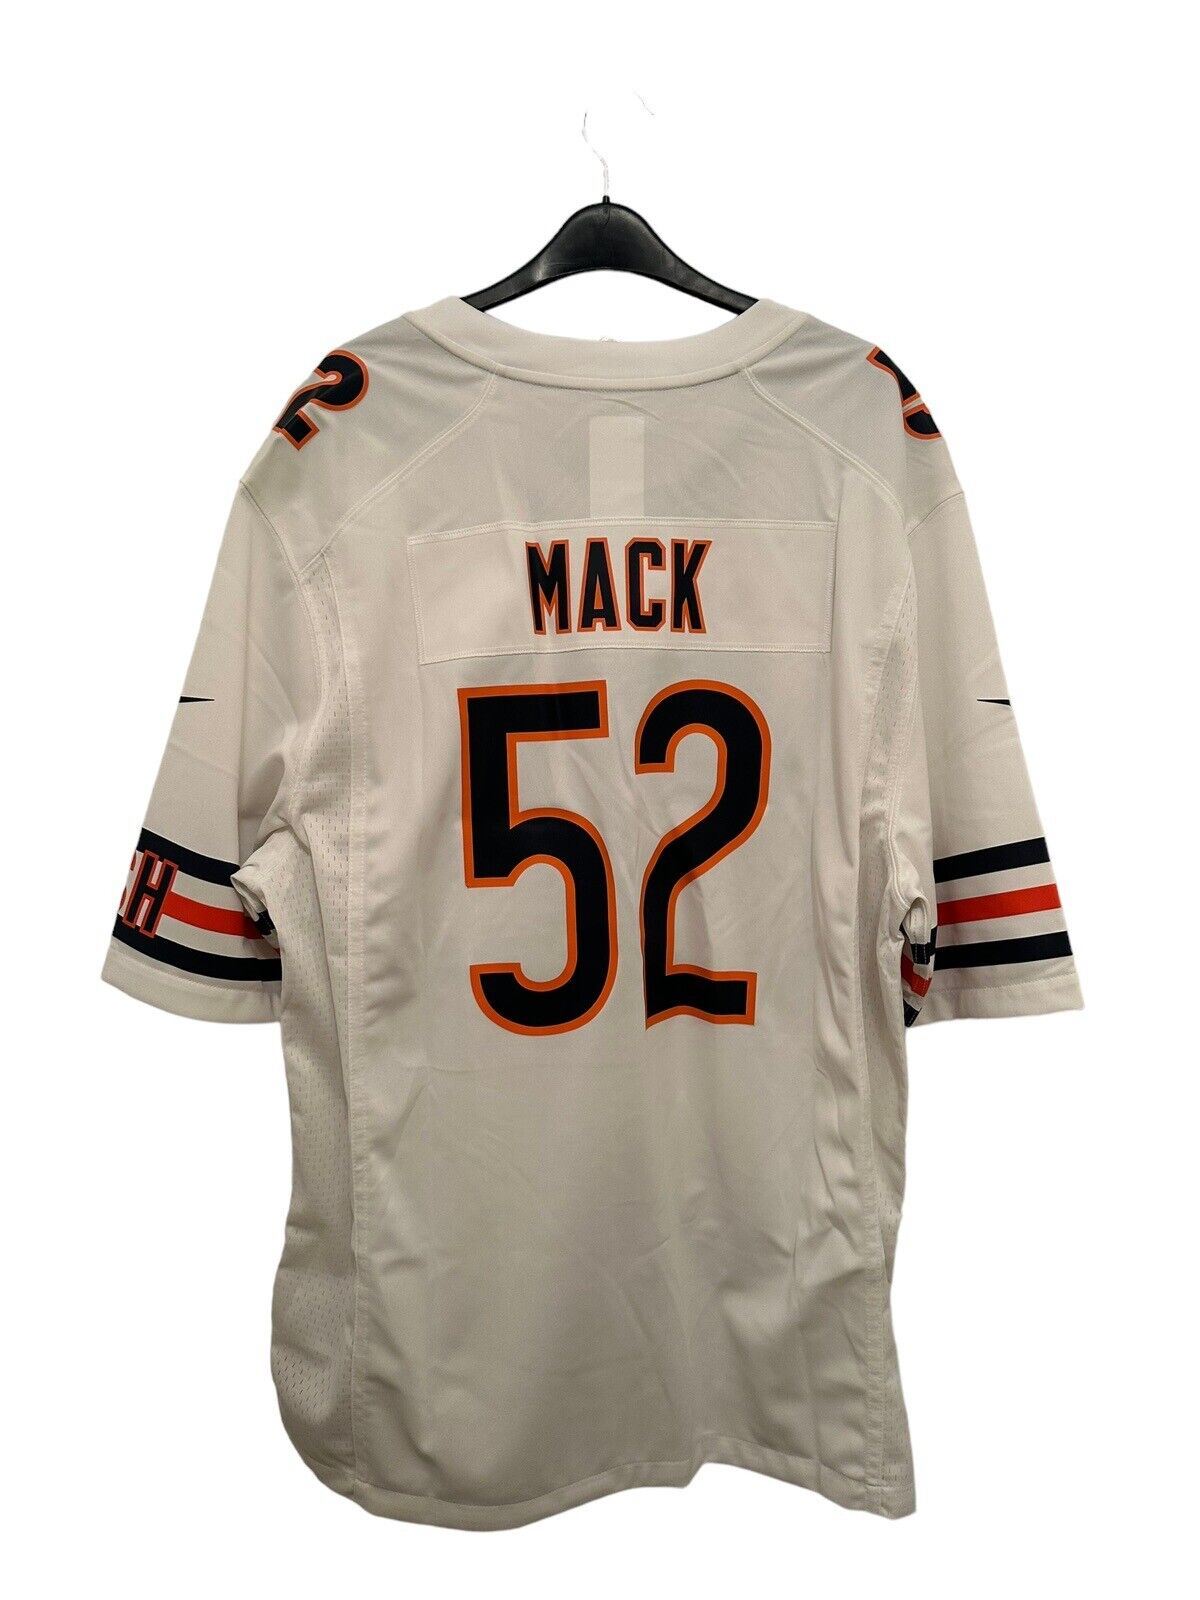 Nike NFL Chicago Bears Road Game Jersey - MACK 52 -  Mens Size XL